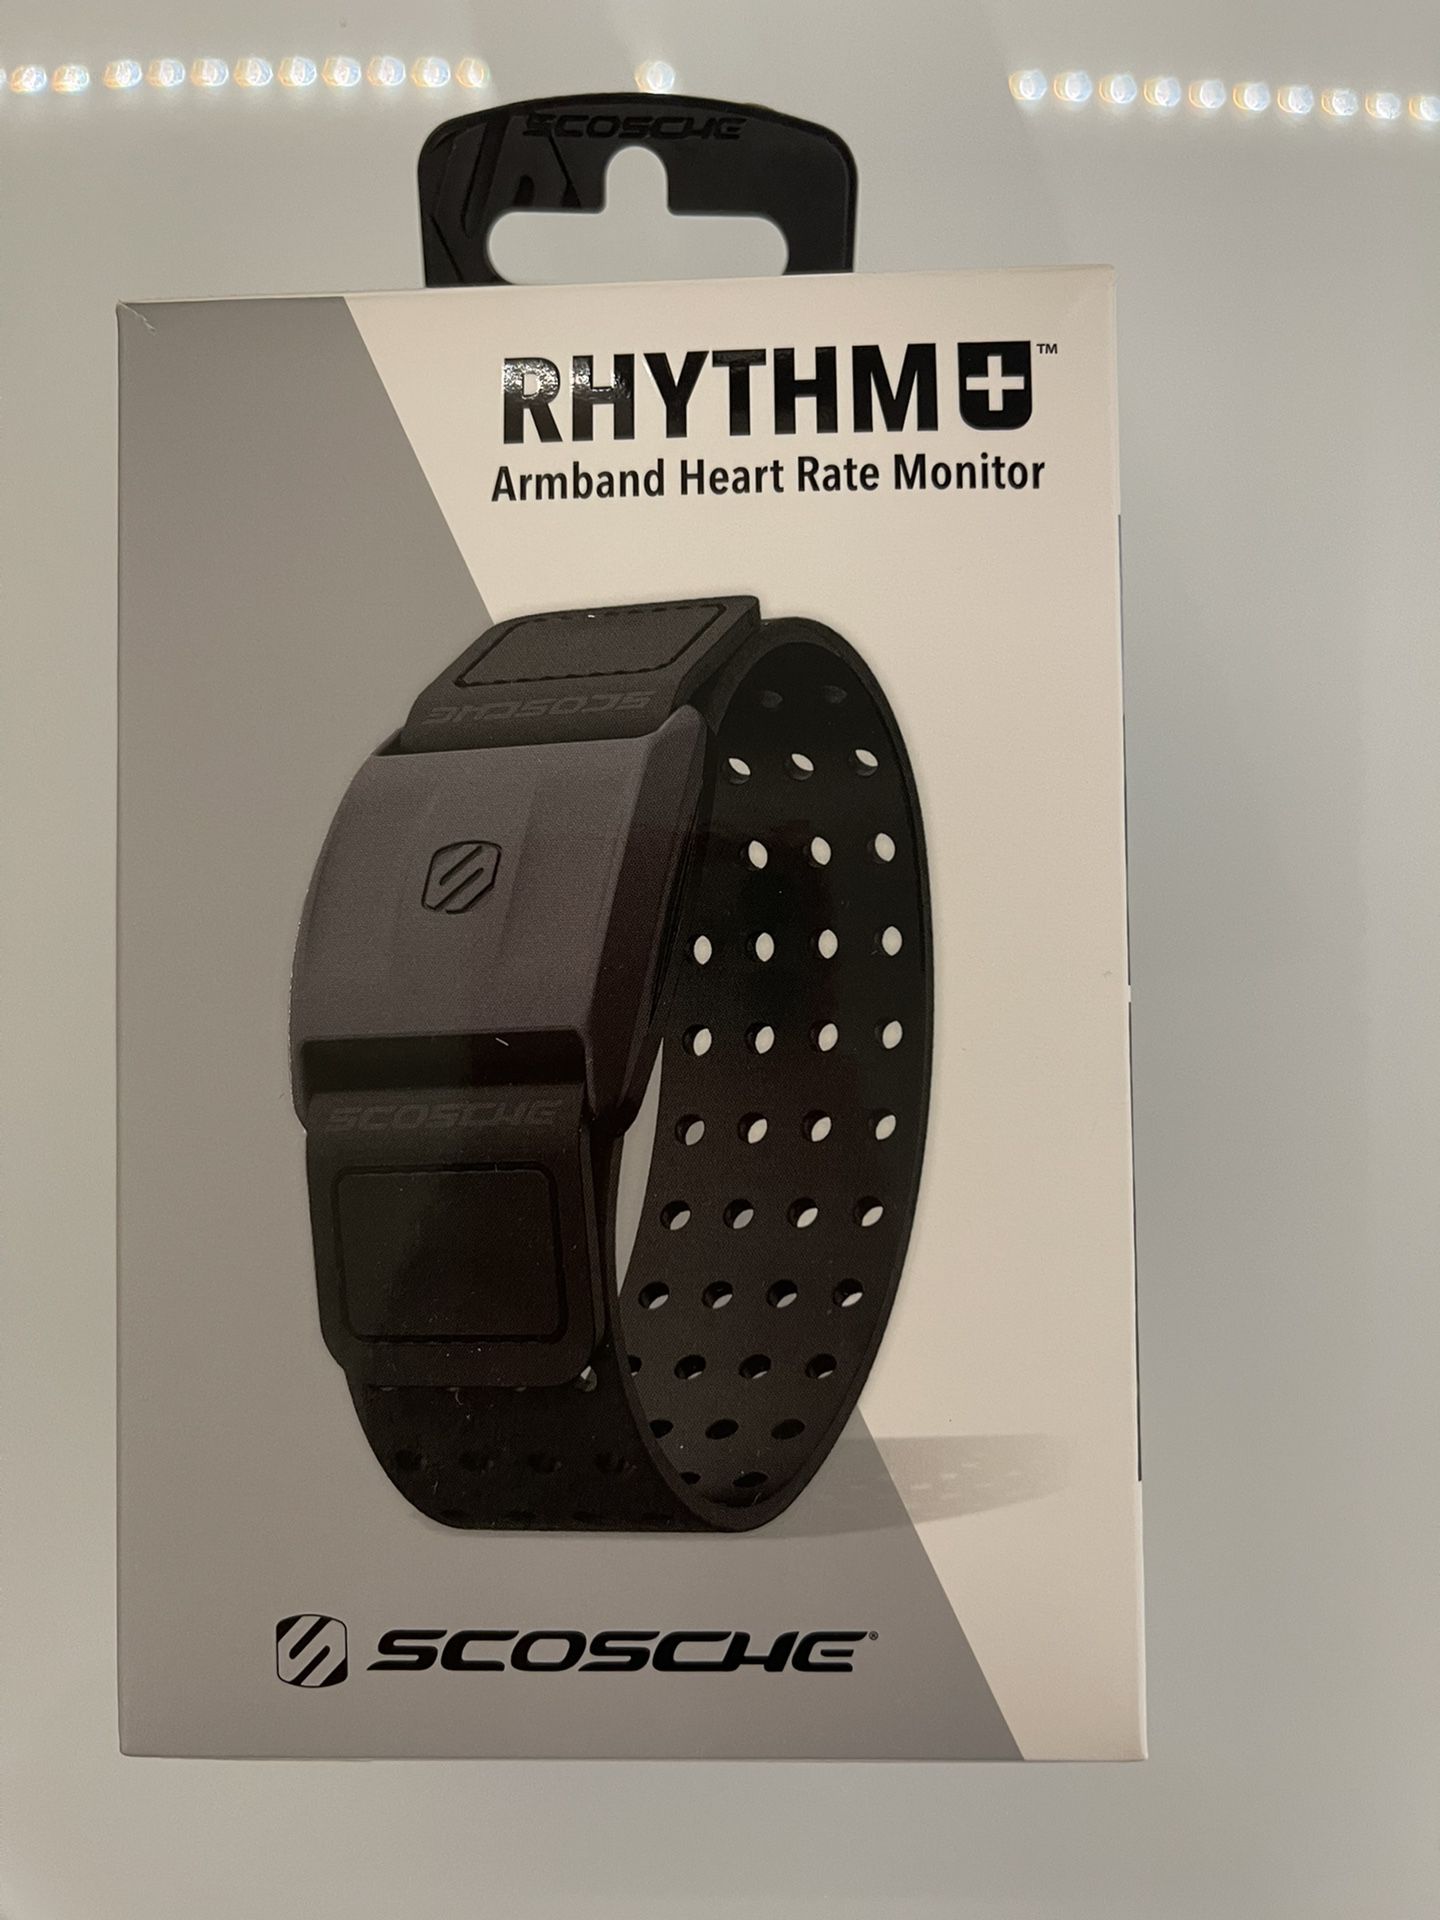 Scosche Rhythm+ Heart Rate Monitor Armband Optical Heart Rate Armband Monitor with Dual Band Radio ANT+ and Bluetooth Smart